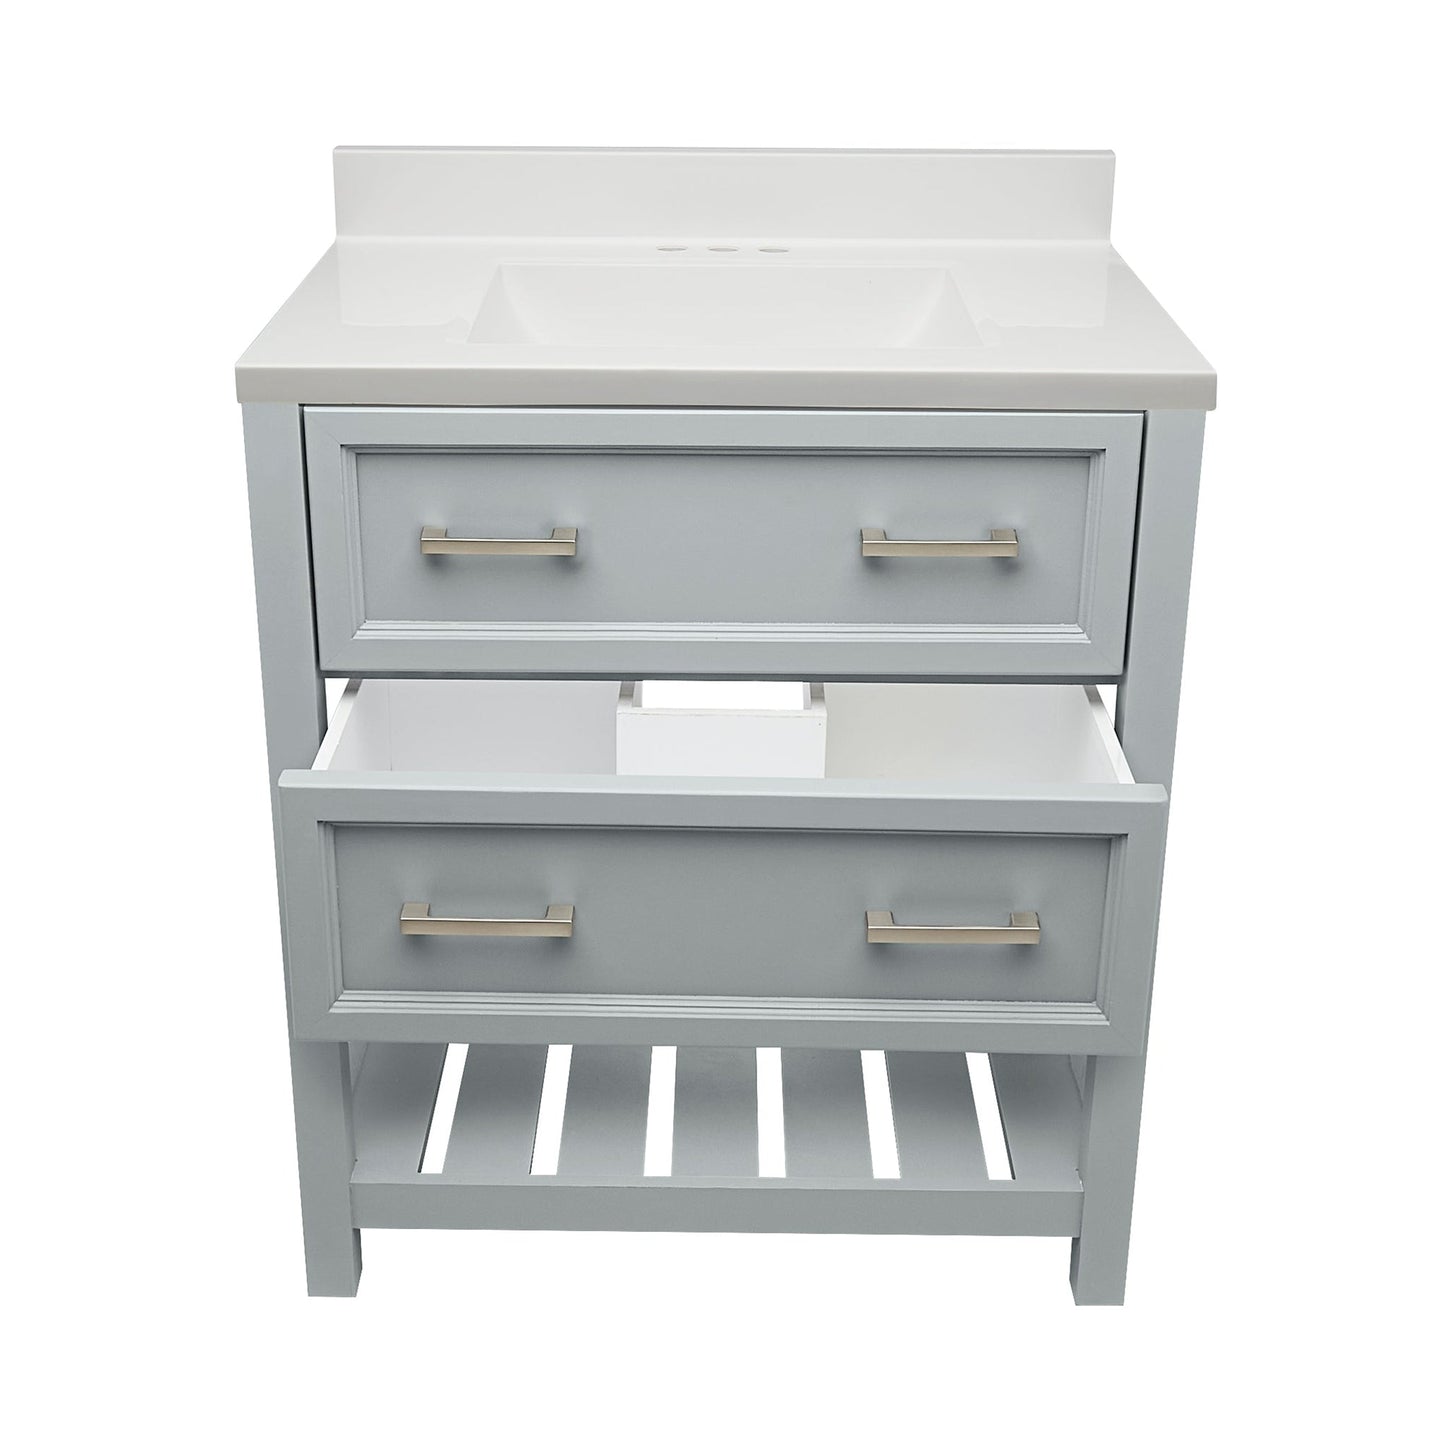 Ella's Bubbles Tremblant 31" Gray Bathroom Vanity With White Cultured Marble Top With White Backsplash and Sink